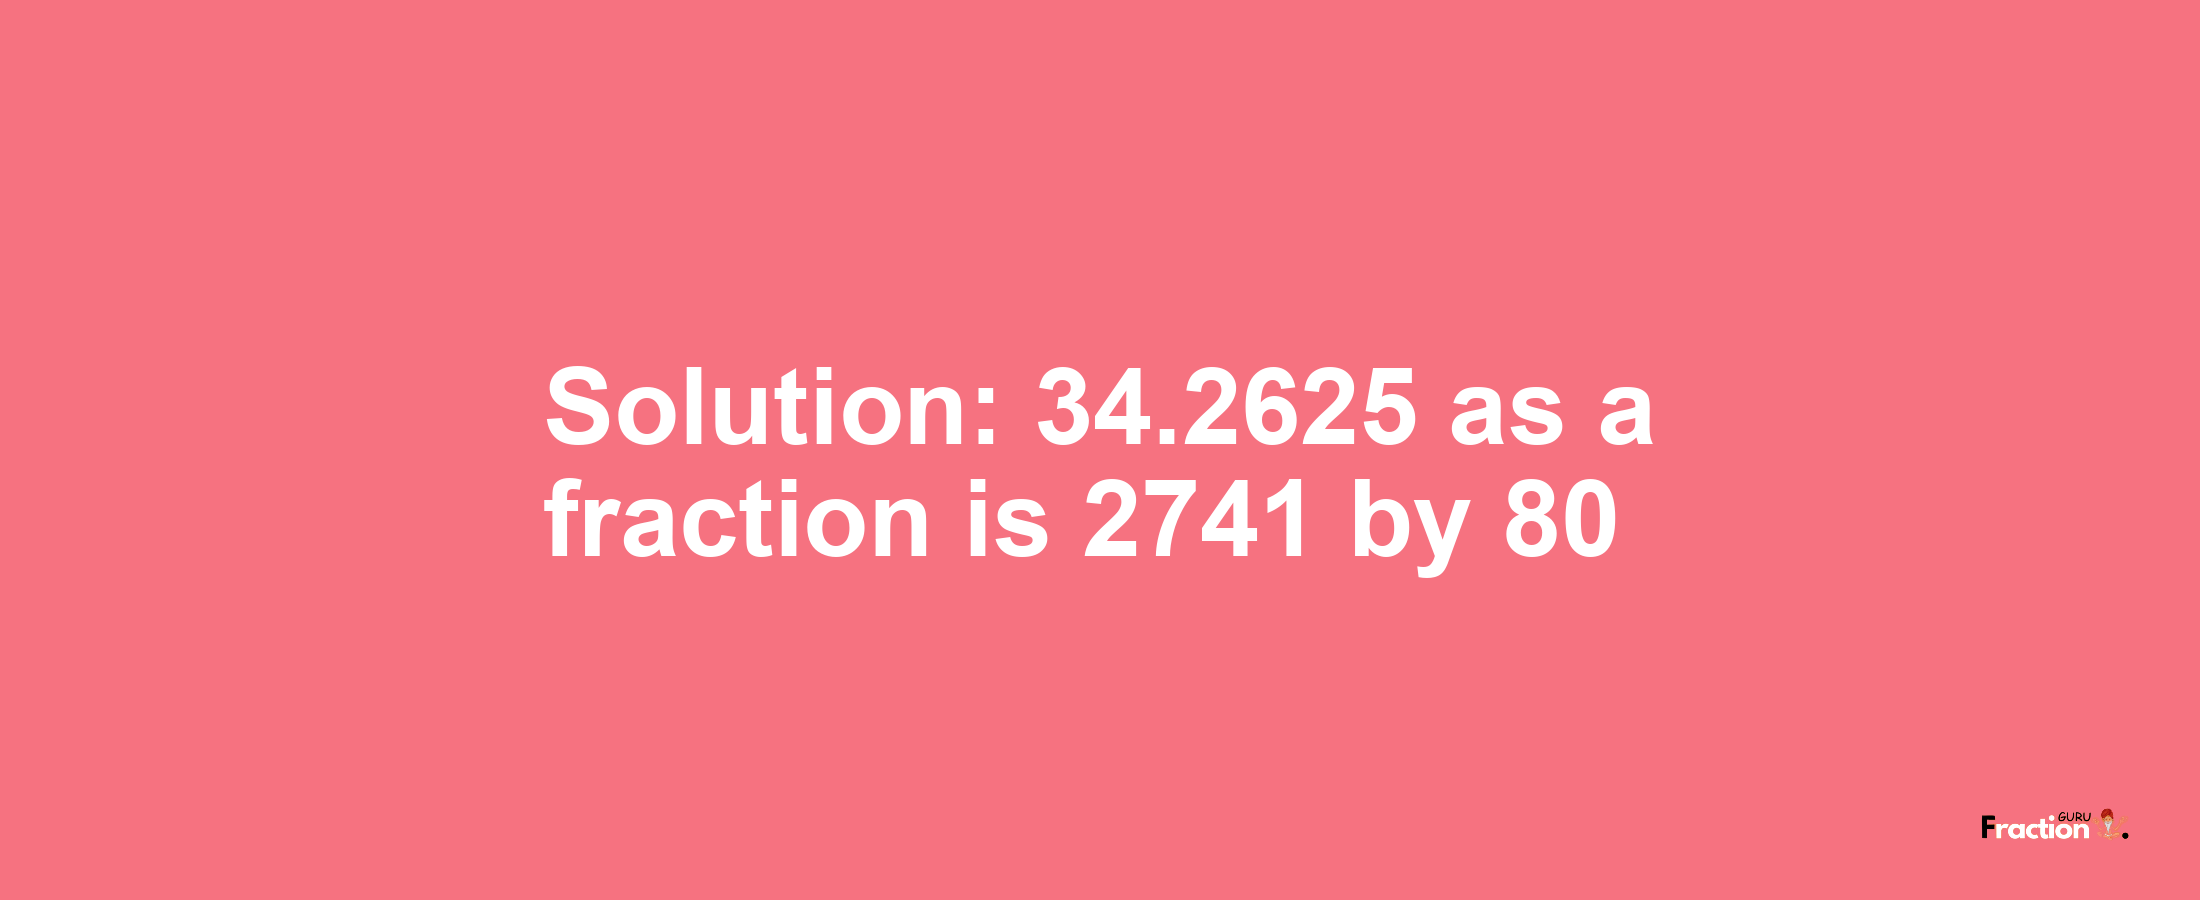 Solution:34.2625 as a fraction is 2741/80